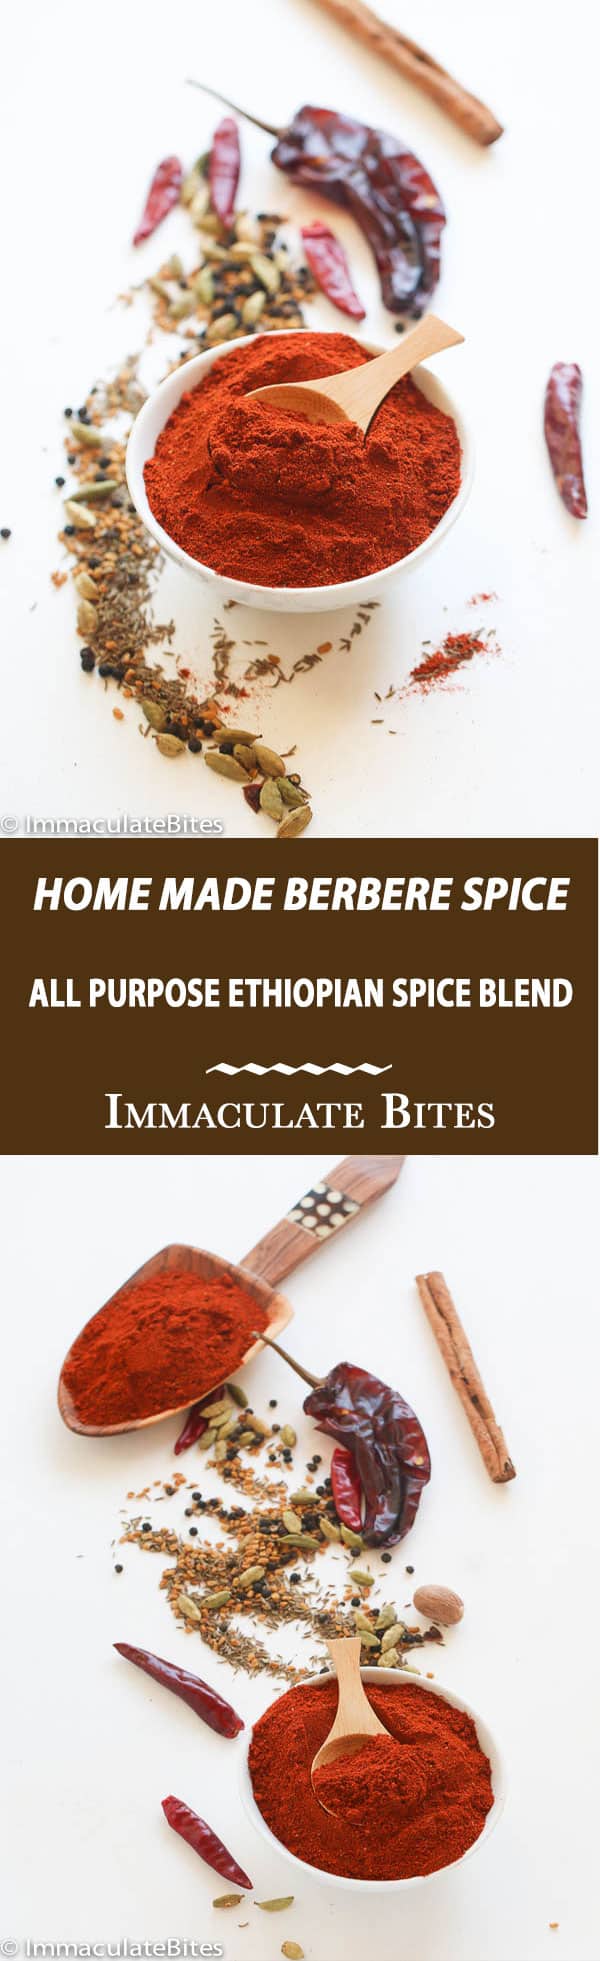 Berbere Spice -Homemade Ethiopian Seasoning Mix - The secret spice blend to making Ethiopian Meals